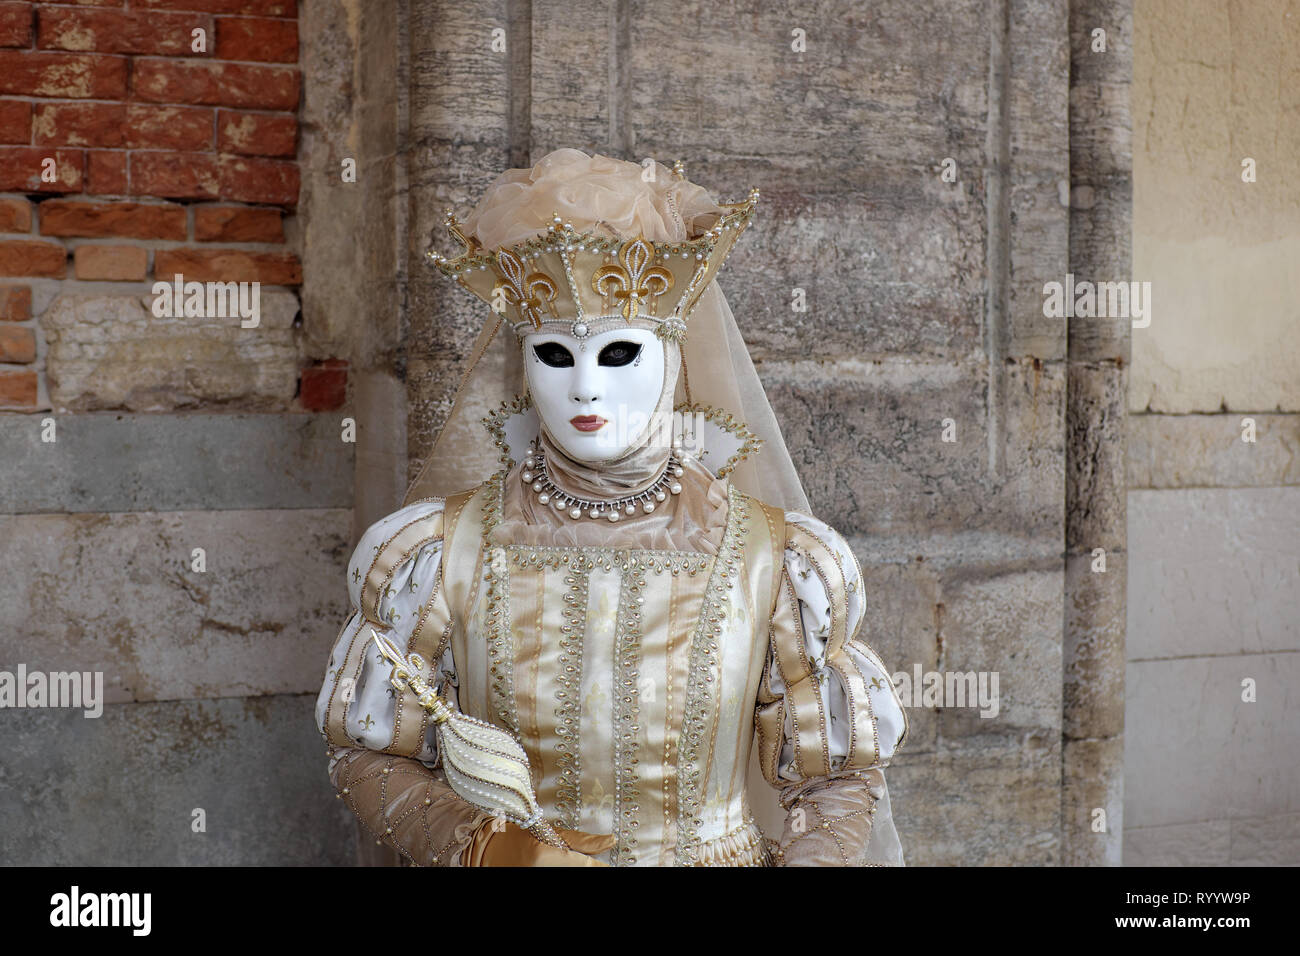 Woman dressed in traditional mask and costume for Venice Carnival standing at Doge’s Palace, Piazza San Marco, Venice, Veneto, Italy Stock Photo